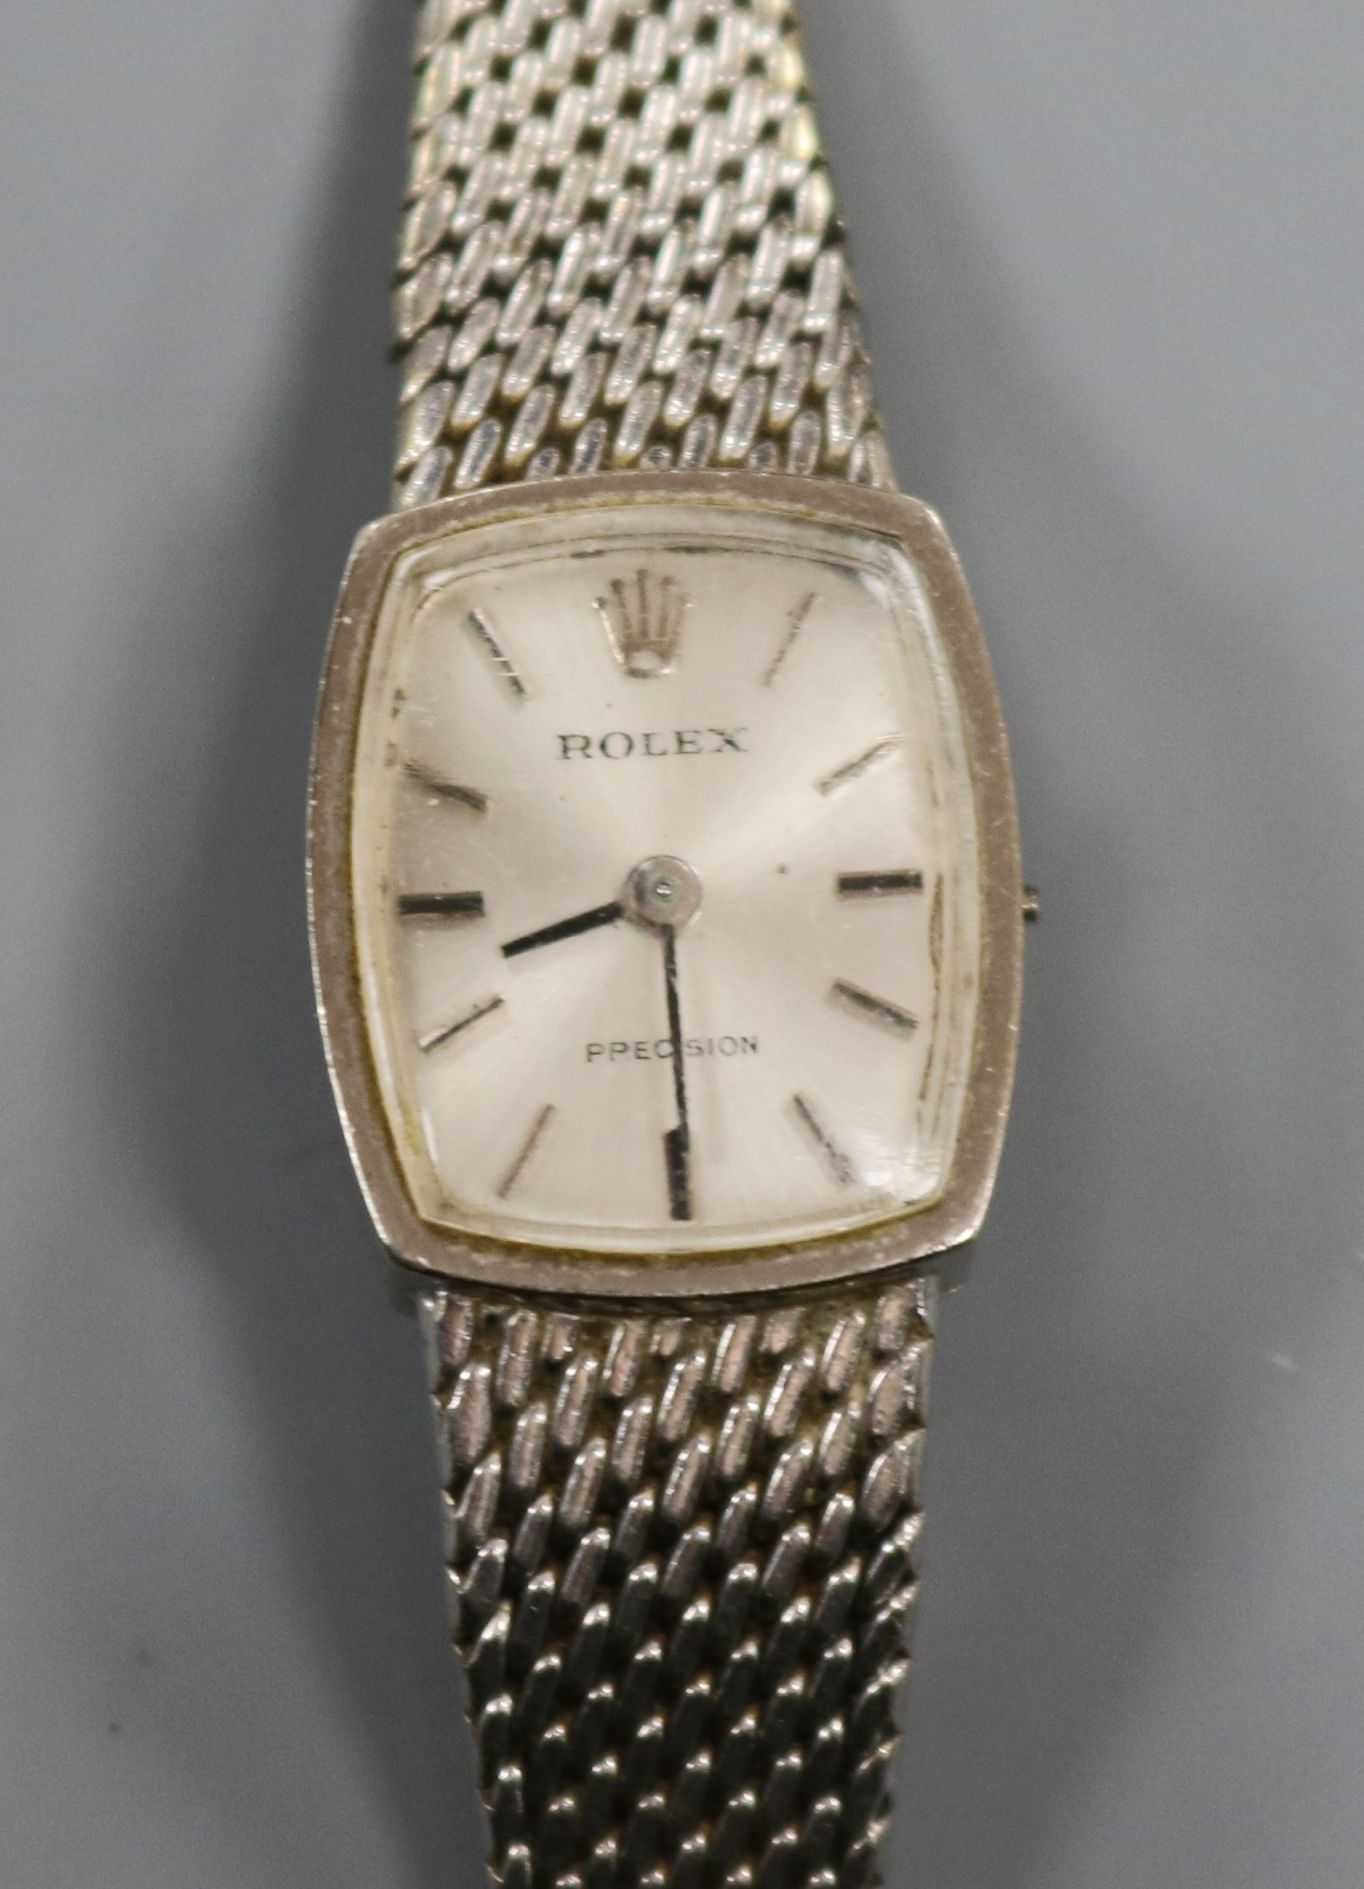 A lady's 9ct white gold Rolex Precision manual wind wrist watch, on a 9ct white gold bracelet (no